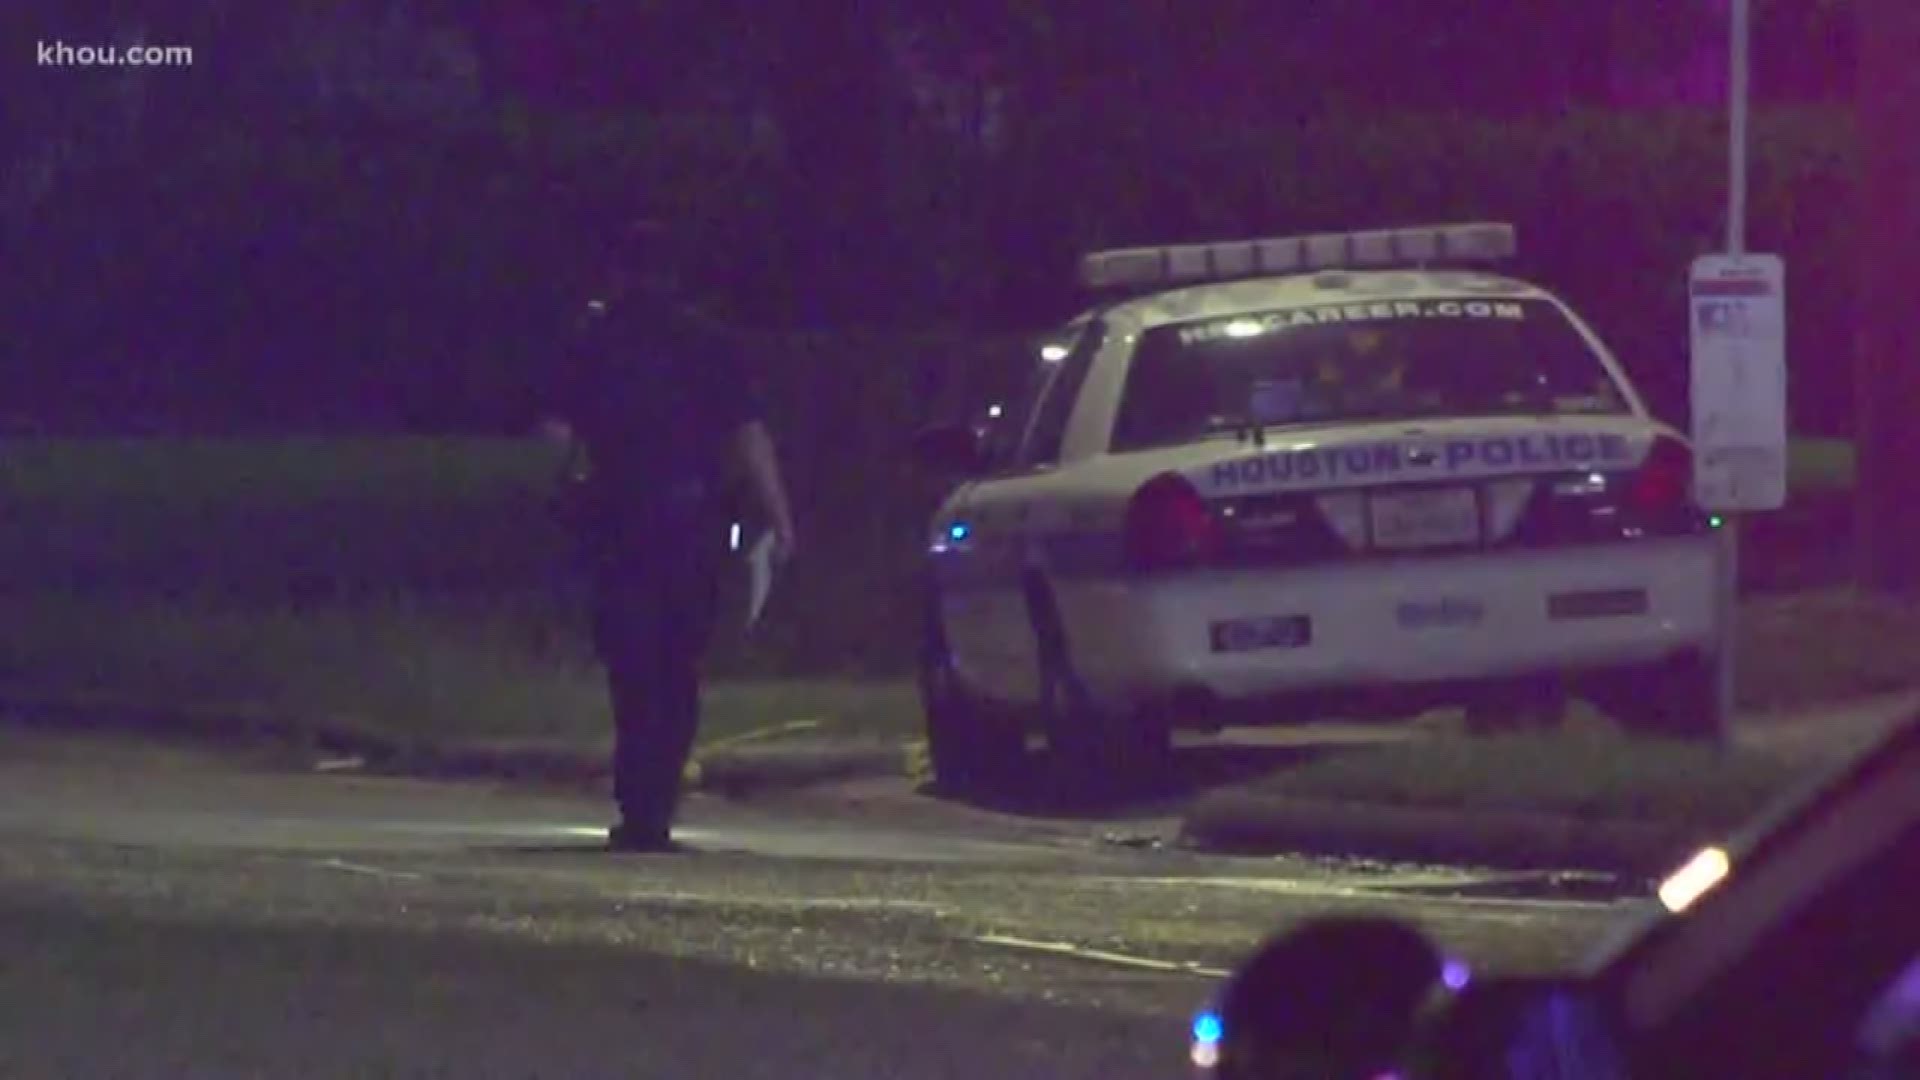 Police are looking for the driver who hit and killed a woman crossing the street in Houston's northside.